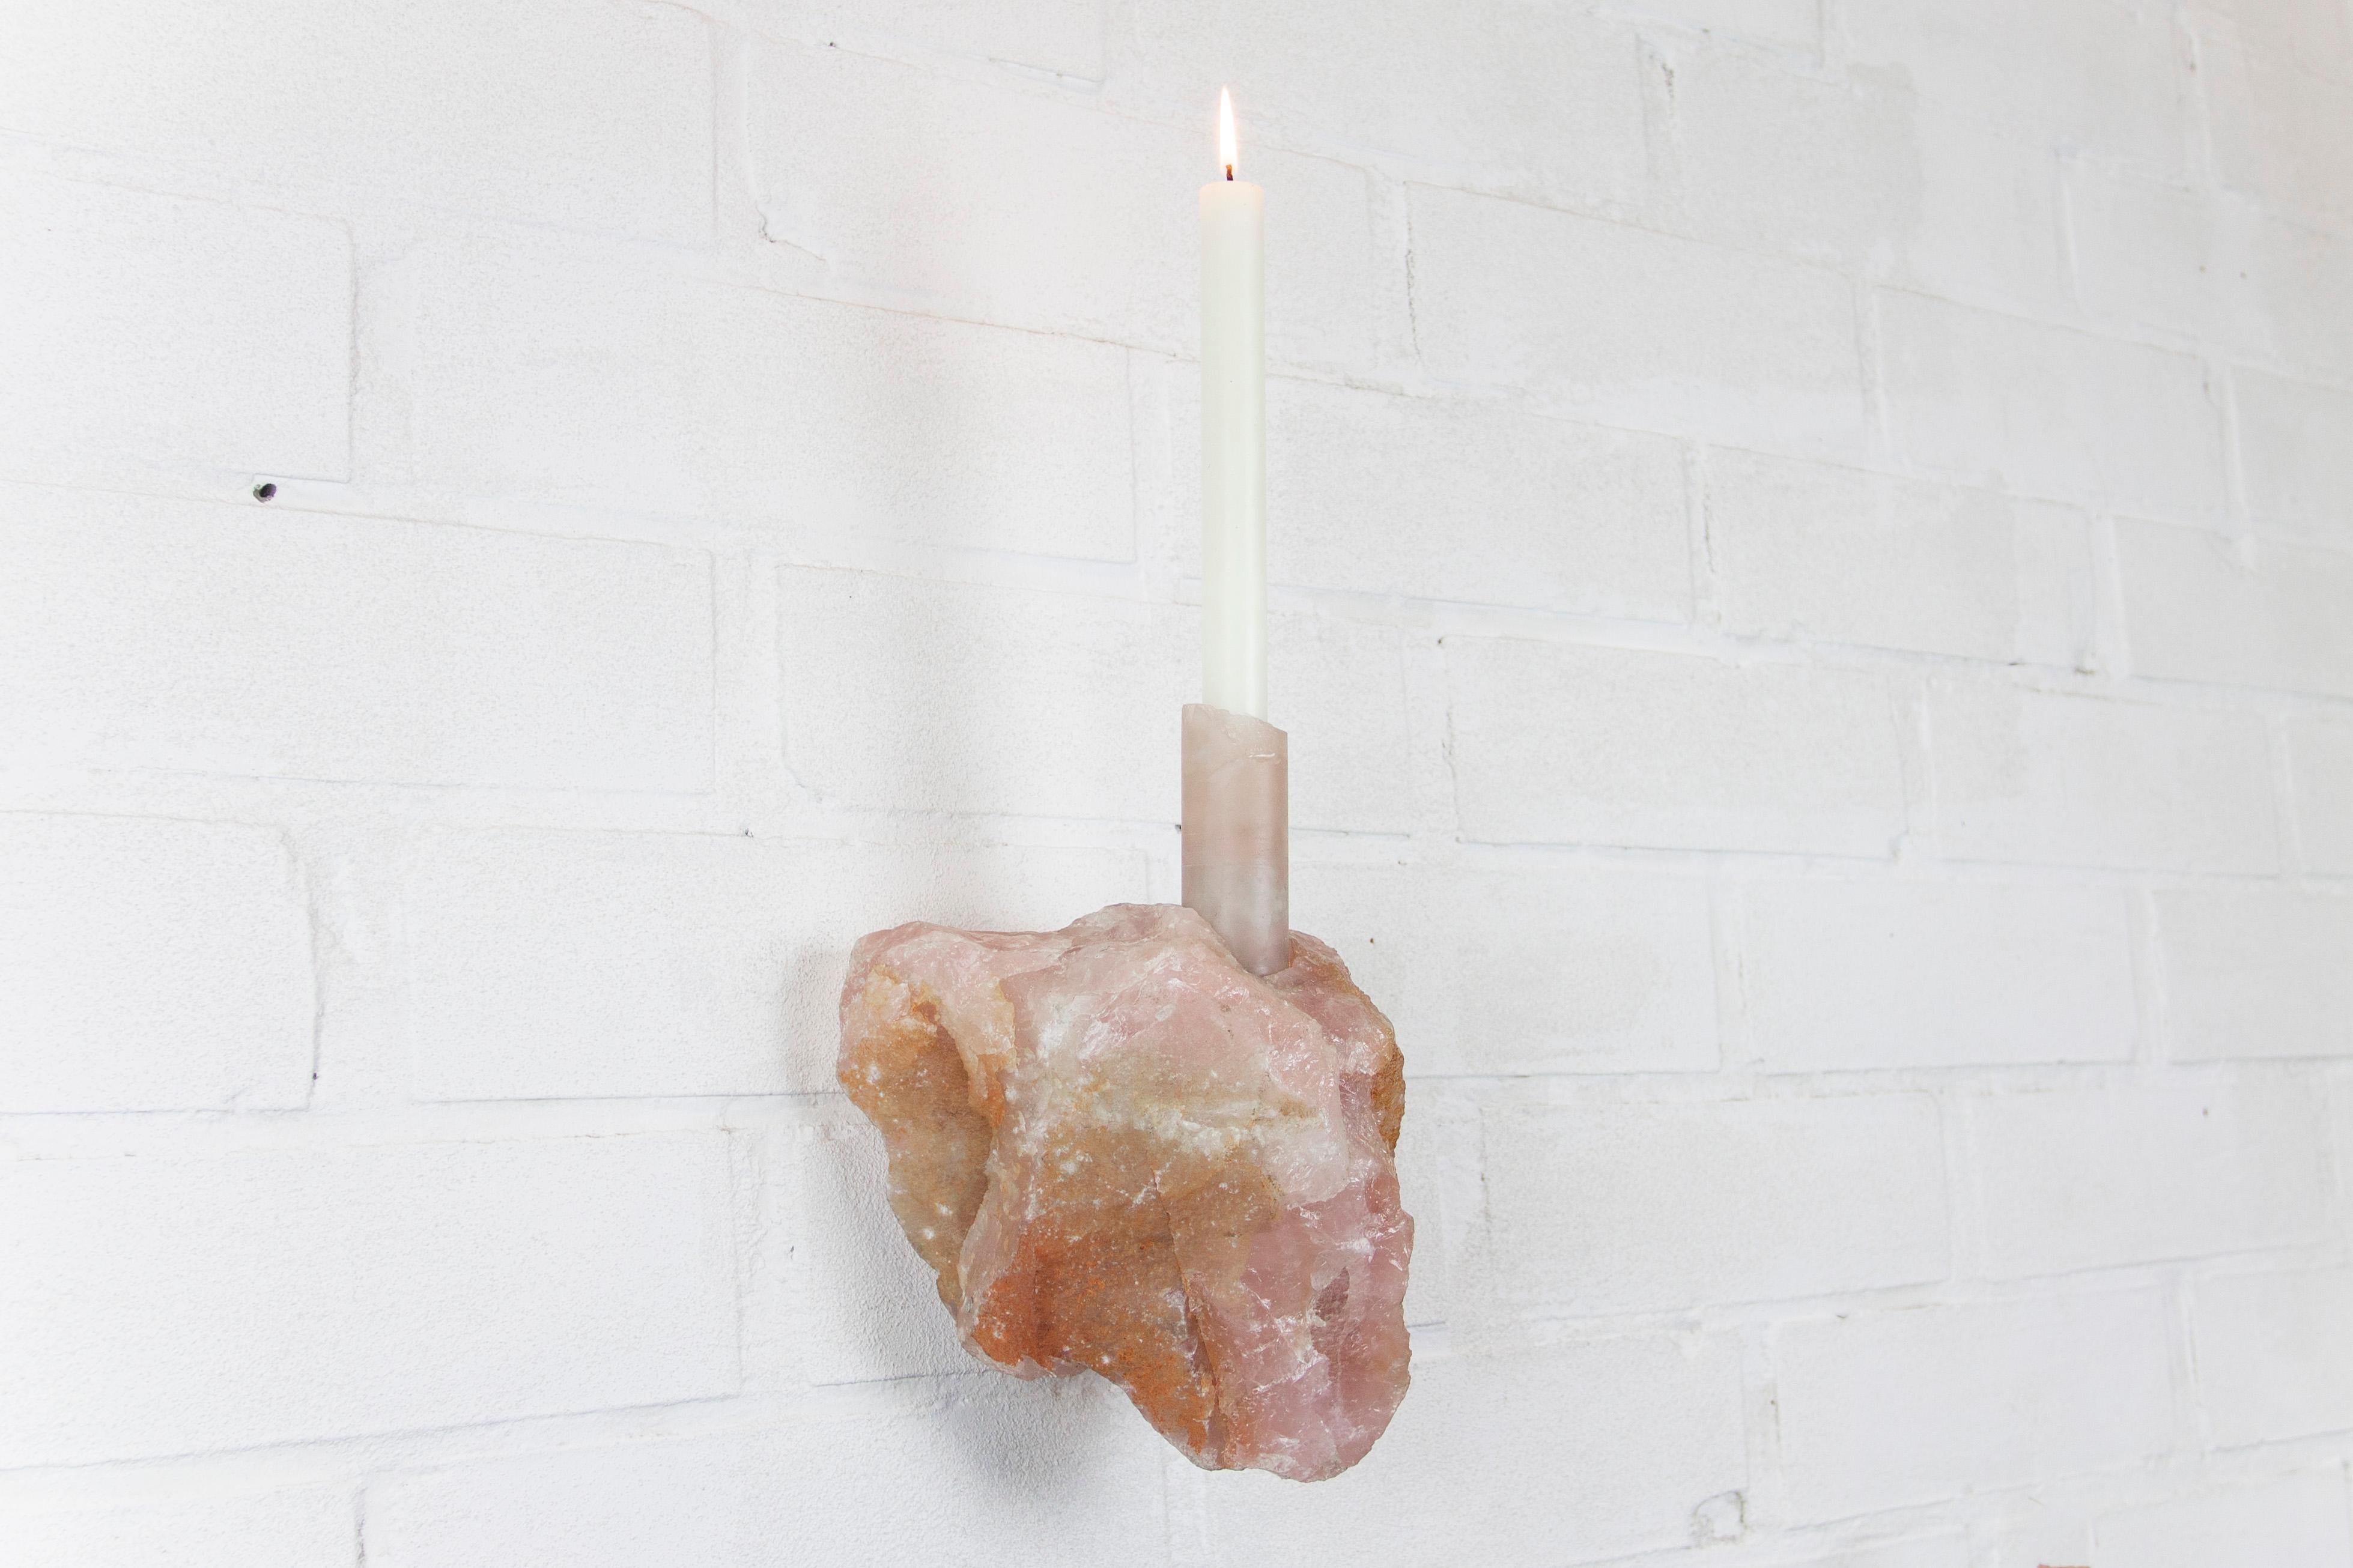 Rose Quartz Abra Candelabra by Studio DO
Dimensions: D 16 x W 14 x H 25.5 cm
Materials: Rose quartz, aluminum.
5.4 kg.

Stone and fire are connected in an ageless bond. A sparkle created by clashing two stones with each other has been igniting fire